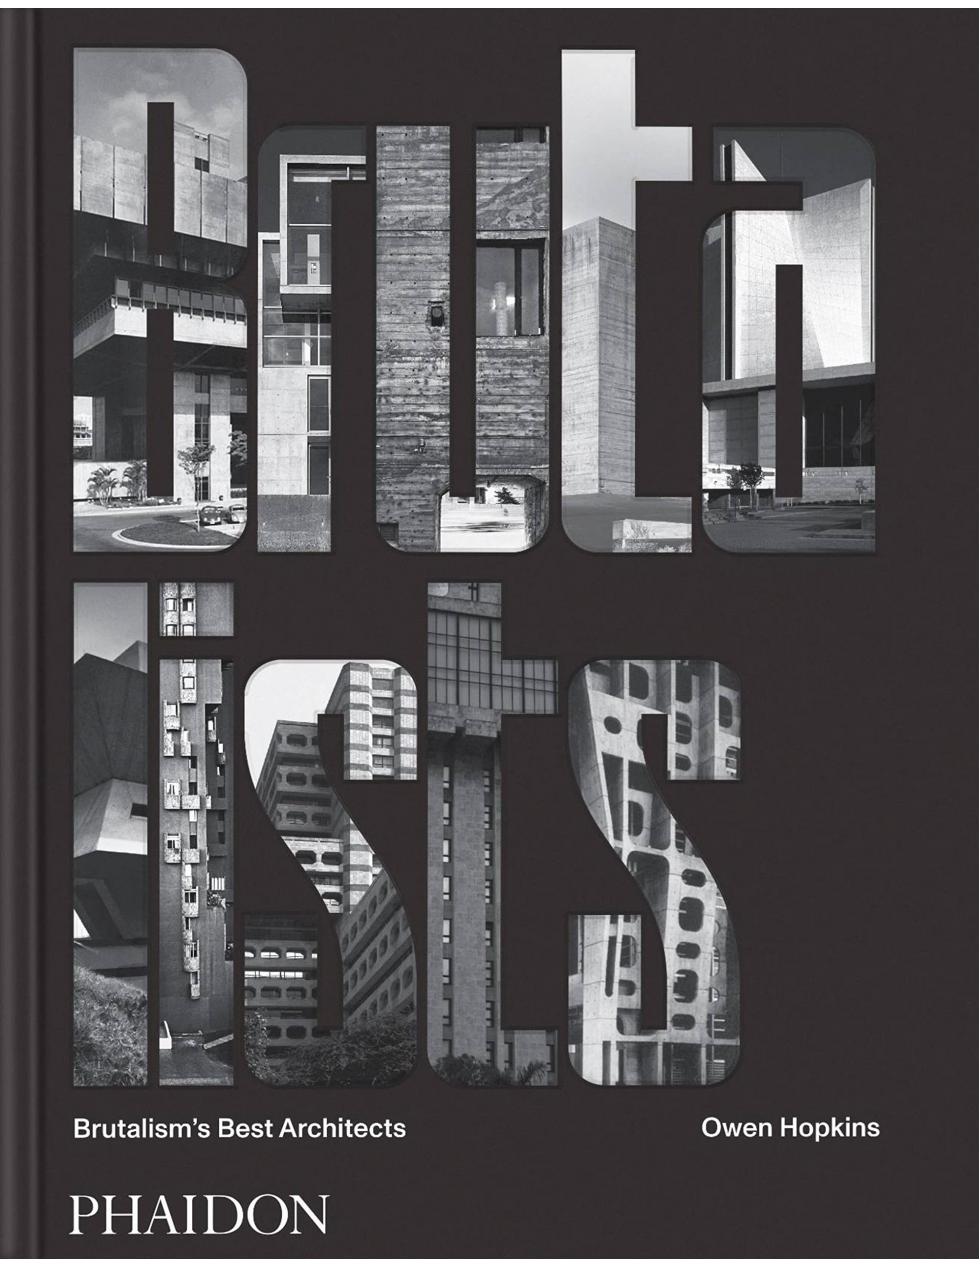 Book: BRUTALISM'S BEST ARCHITECTS